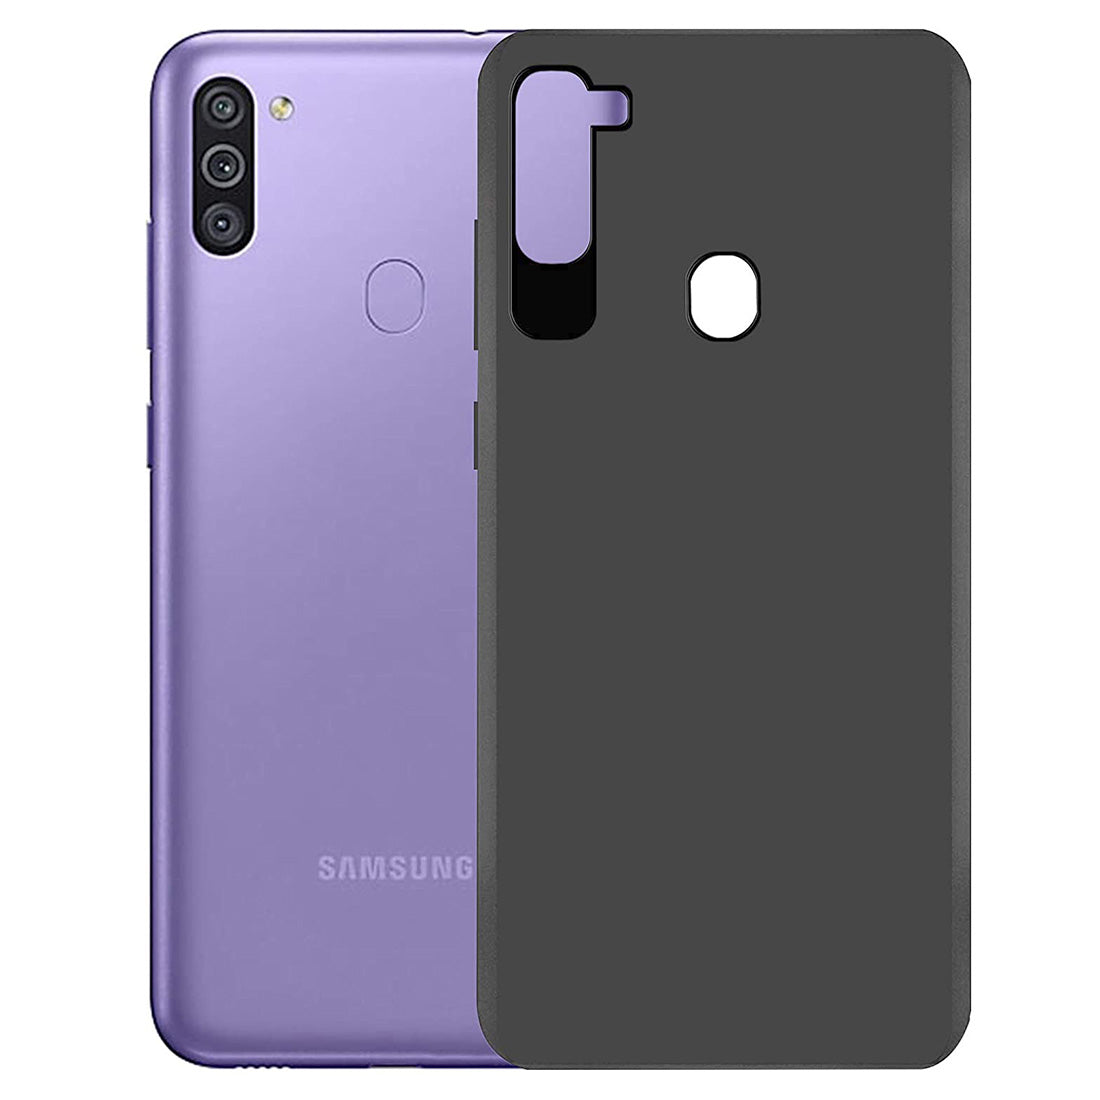 Matte Finish TPU Back Cover for Samsung Galaxy A11 4G / M11 4G